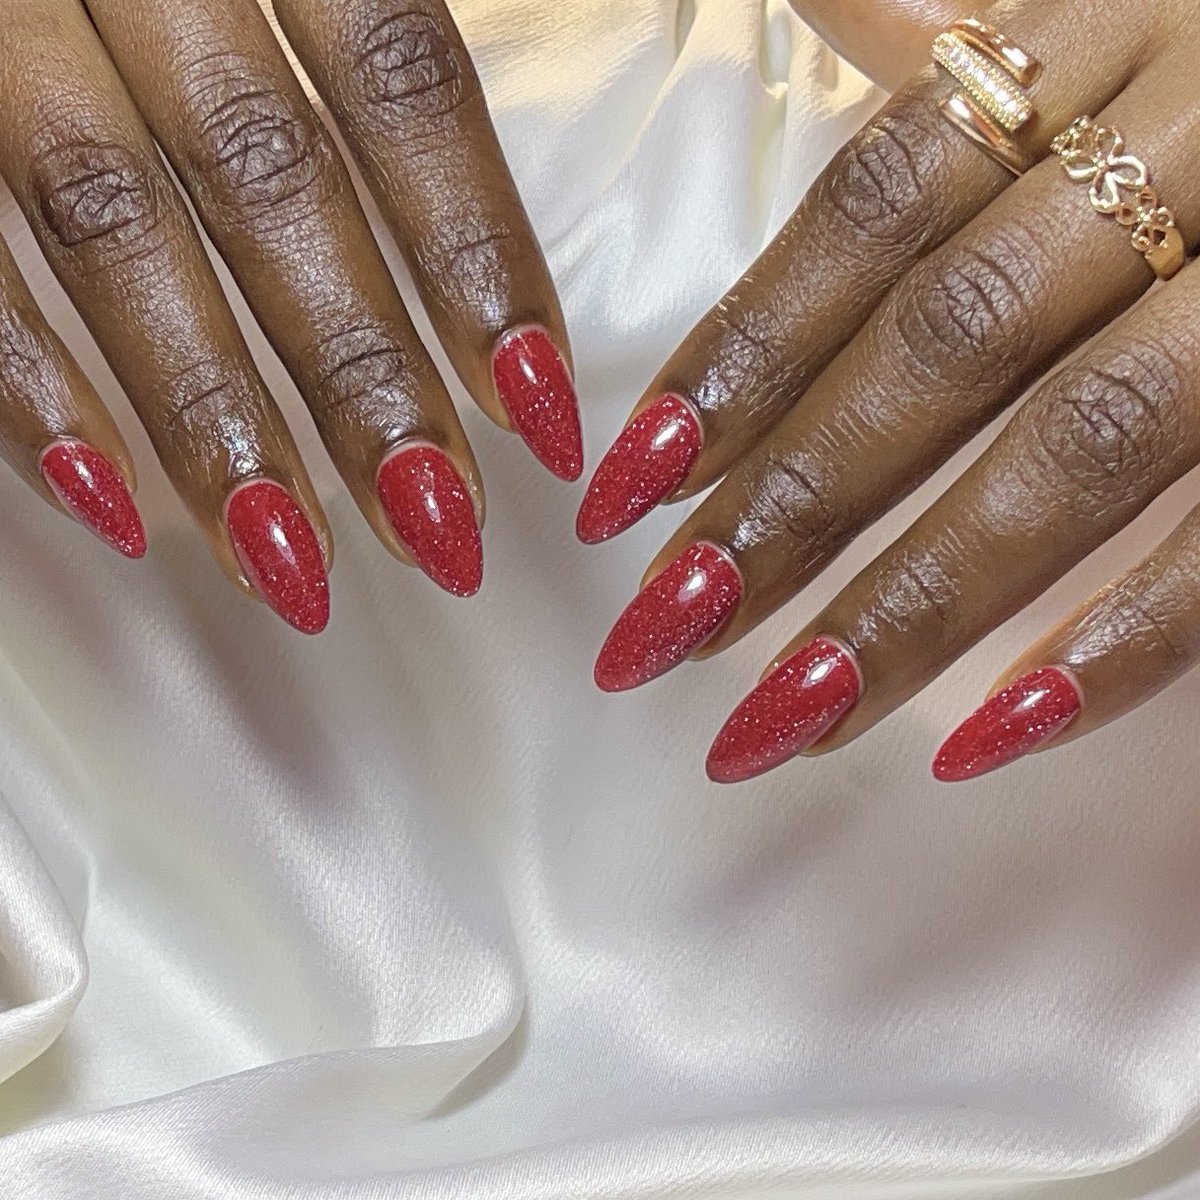 This is how we do it👏🏽👏🏽
Almond Polygel hybrid extension
Disco gel color👌🏾

You can book your appointment now and get the same thing🥰
0621217921
📍Mlimani City